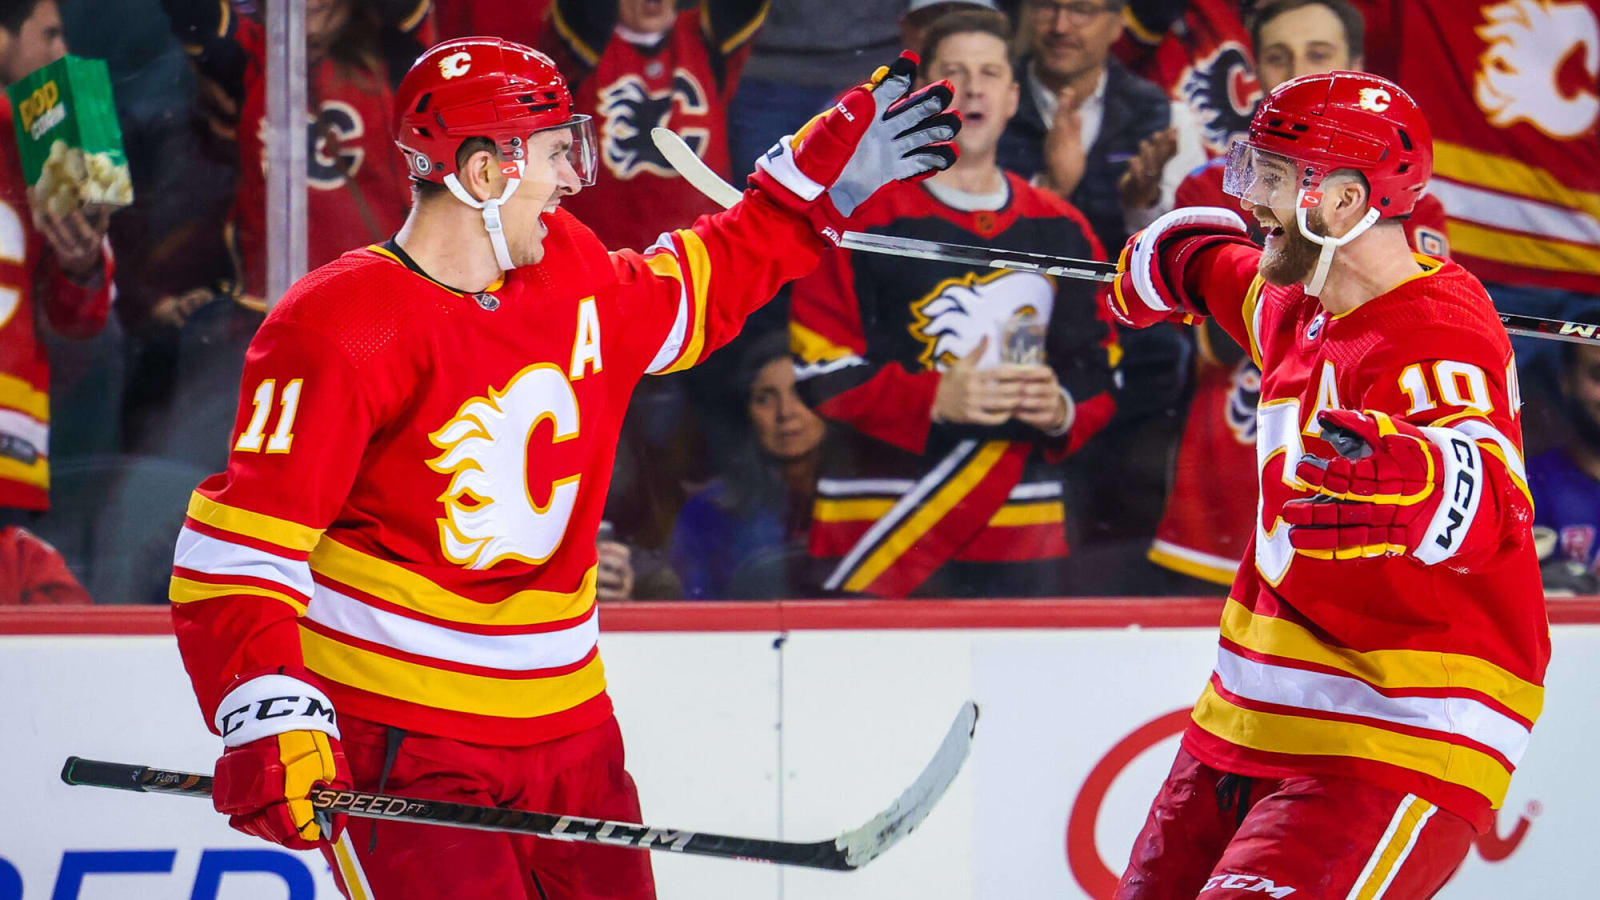 The Calgary Flames unveiled new forward lines at Monday’s practice